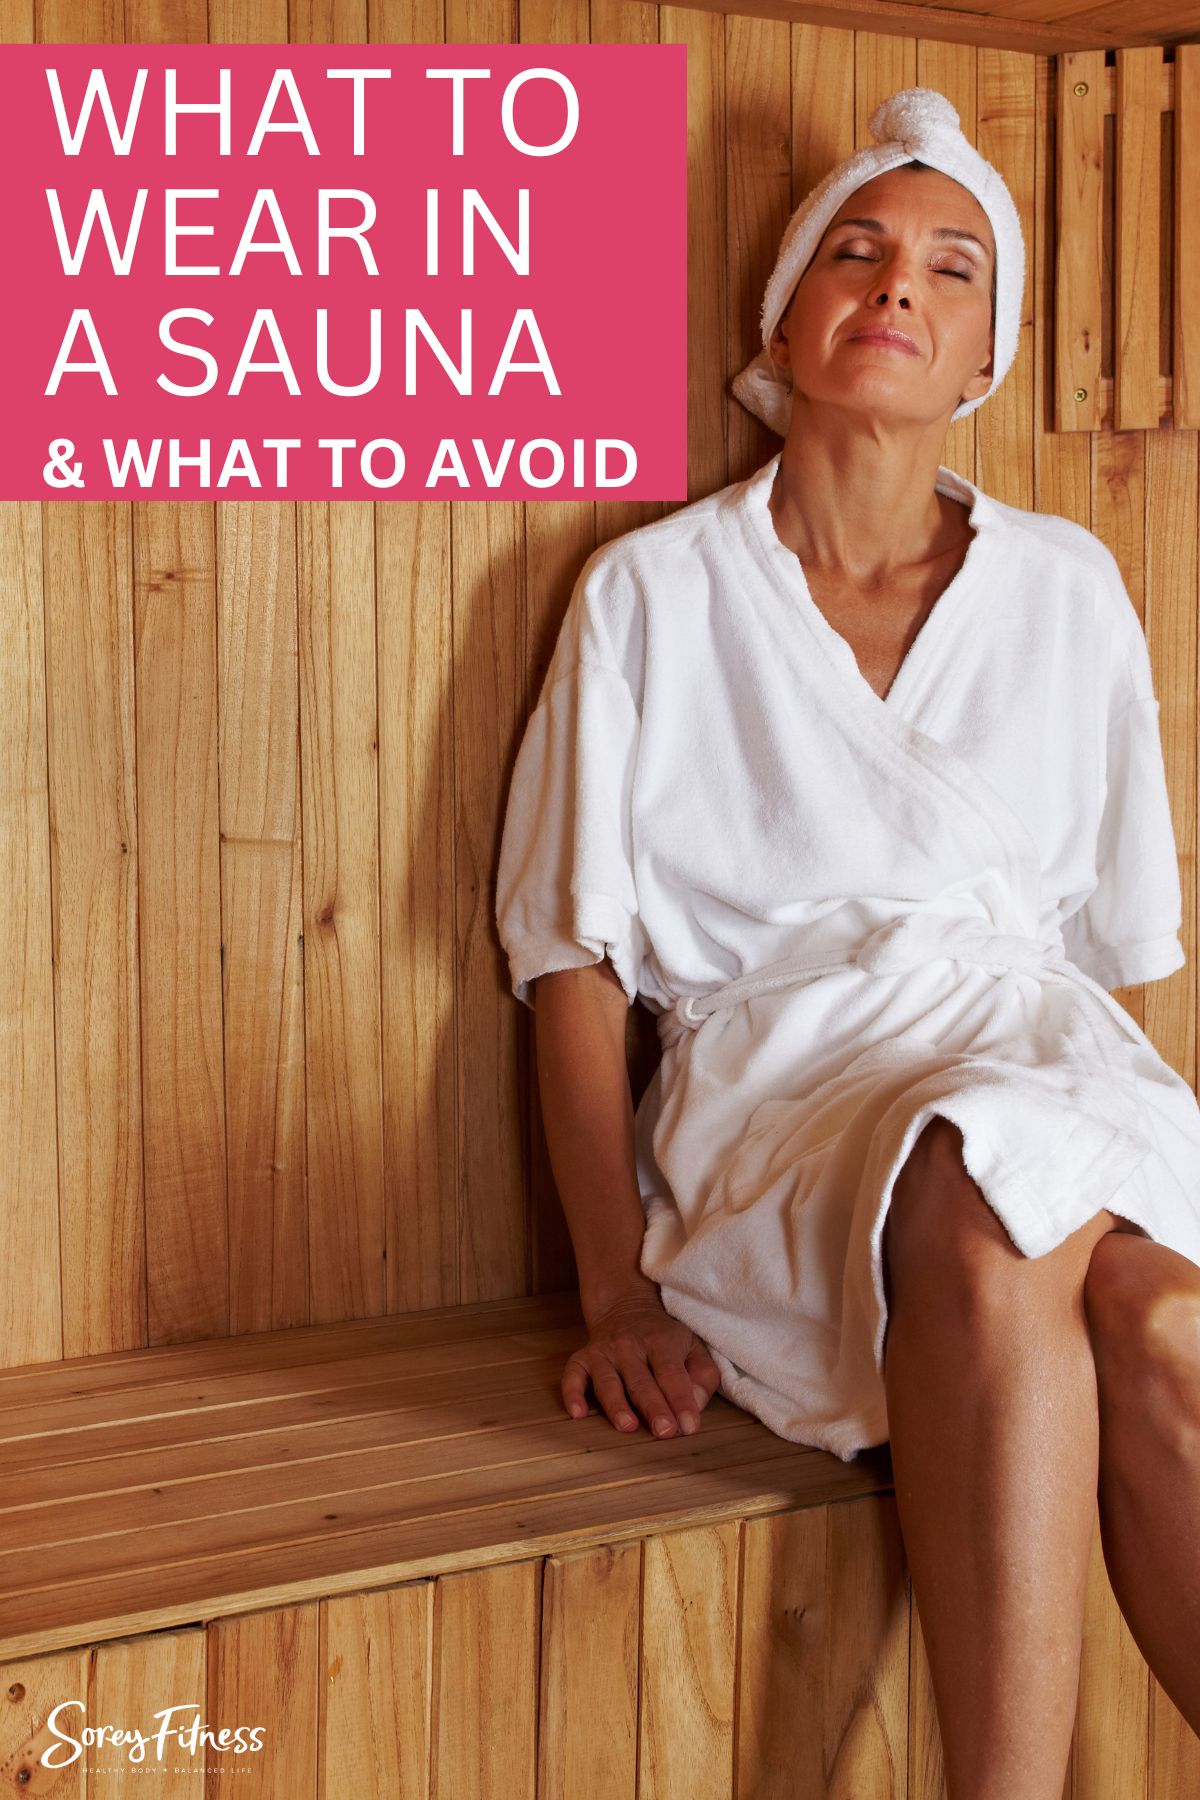 woman in a robe and towel on her head in a sauna - text overlay says what to wear in a sauna & what to avoid